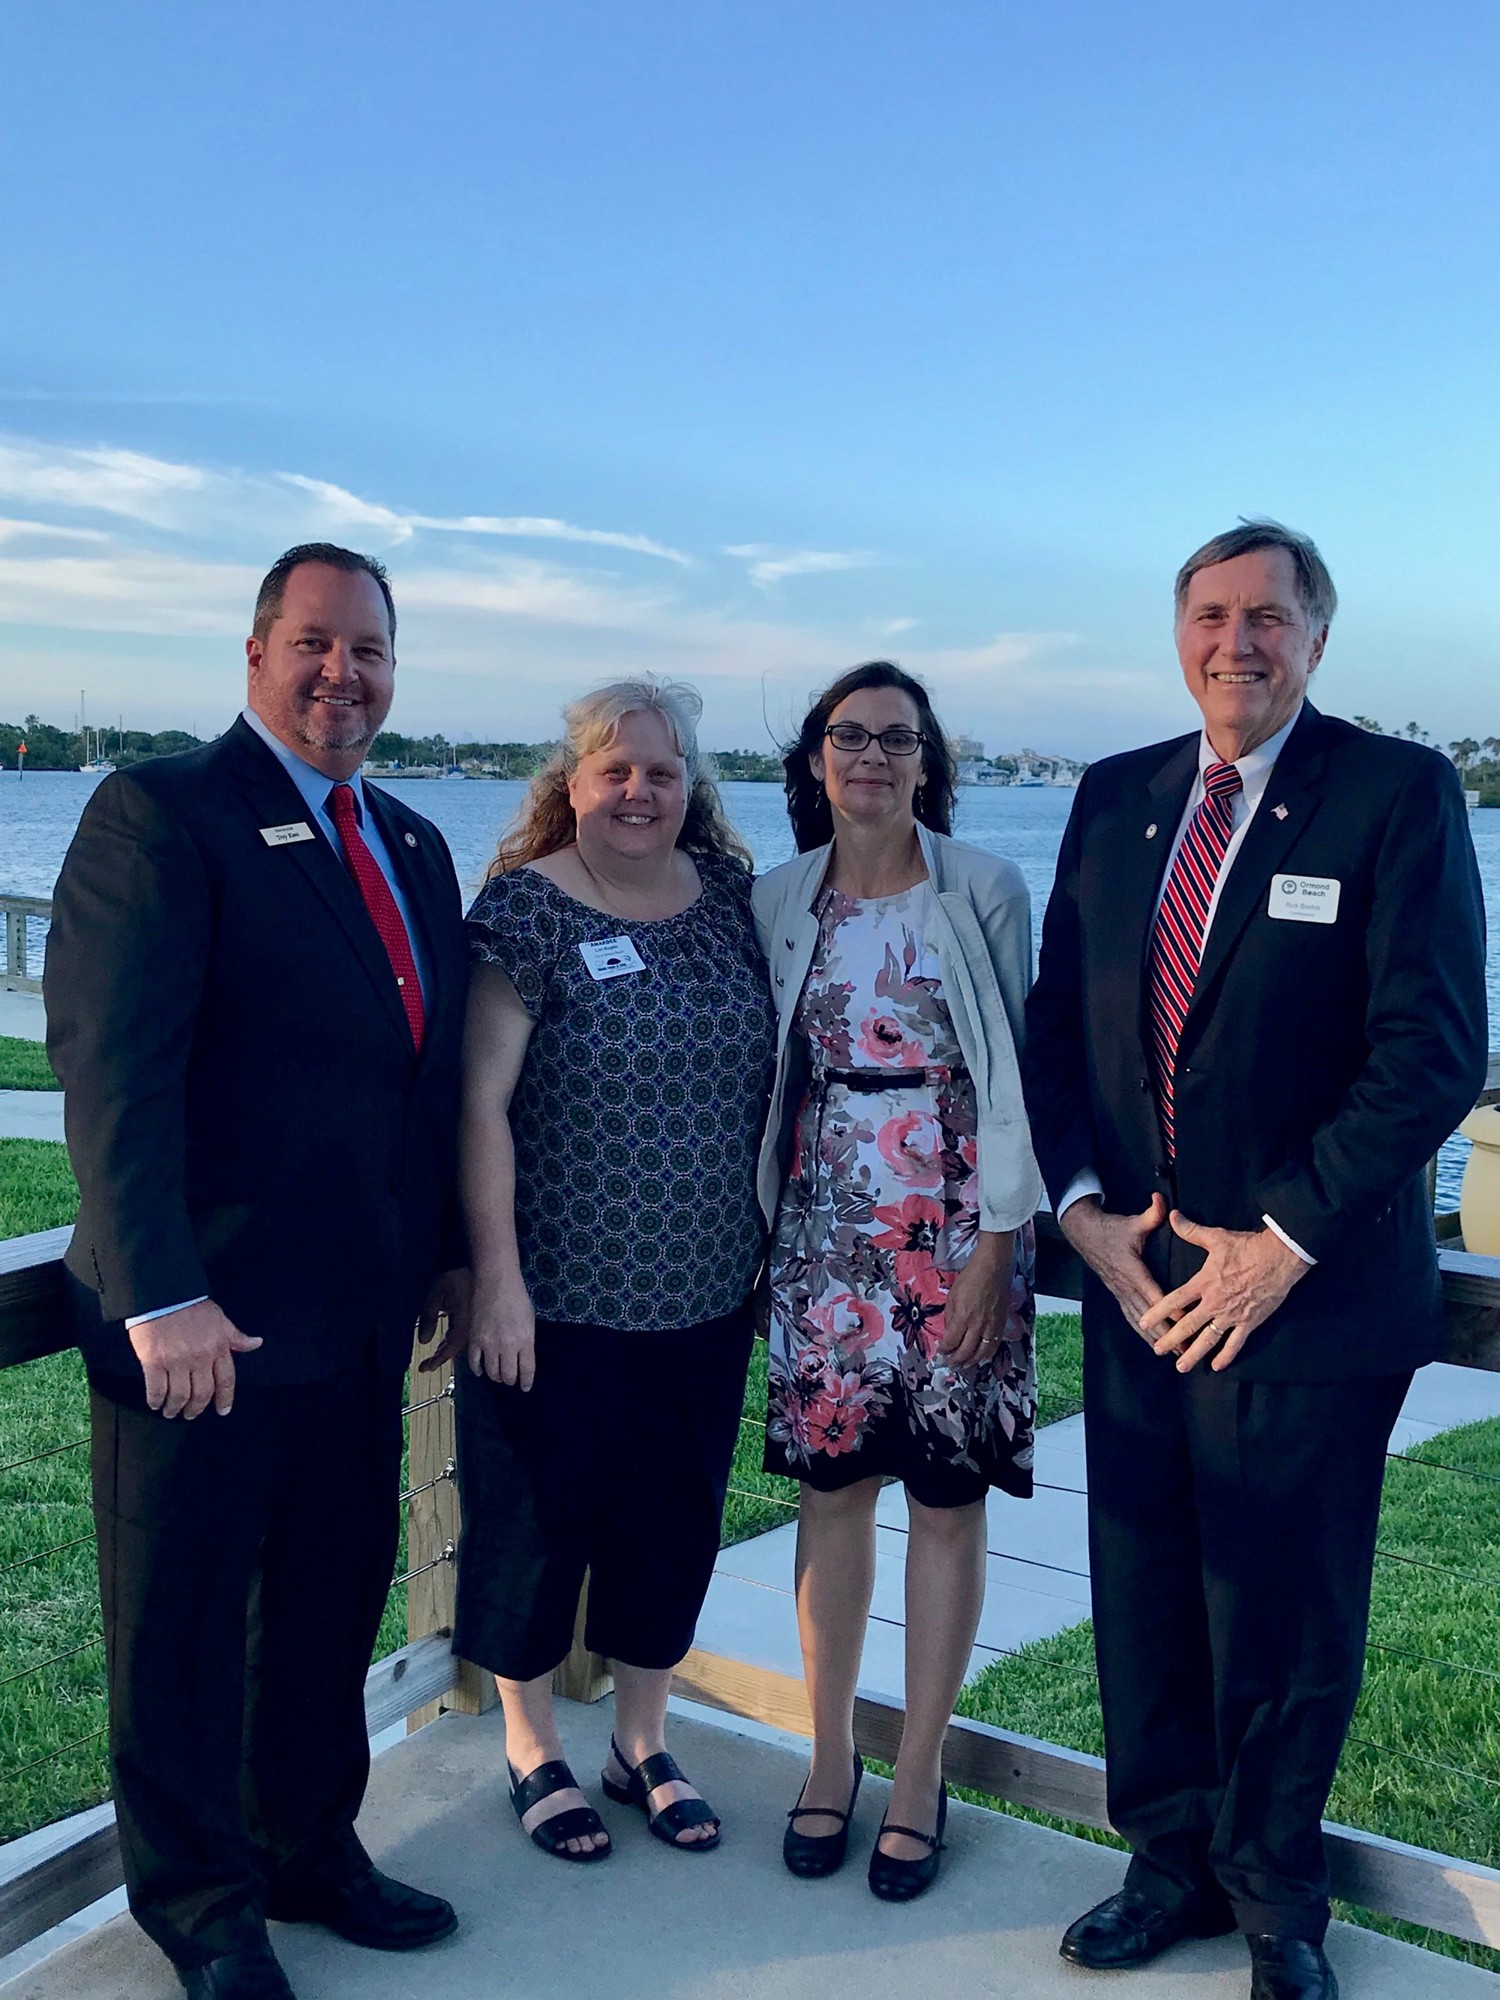 Deputy Mayor Troy Kent, Lori Koplin, Kelly McGuire and City Commissioner Rick Boehm at the Volusia League of Cities annual banquet on Thursday, May 24. Courtesy photo